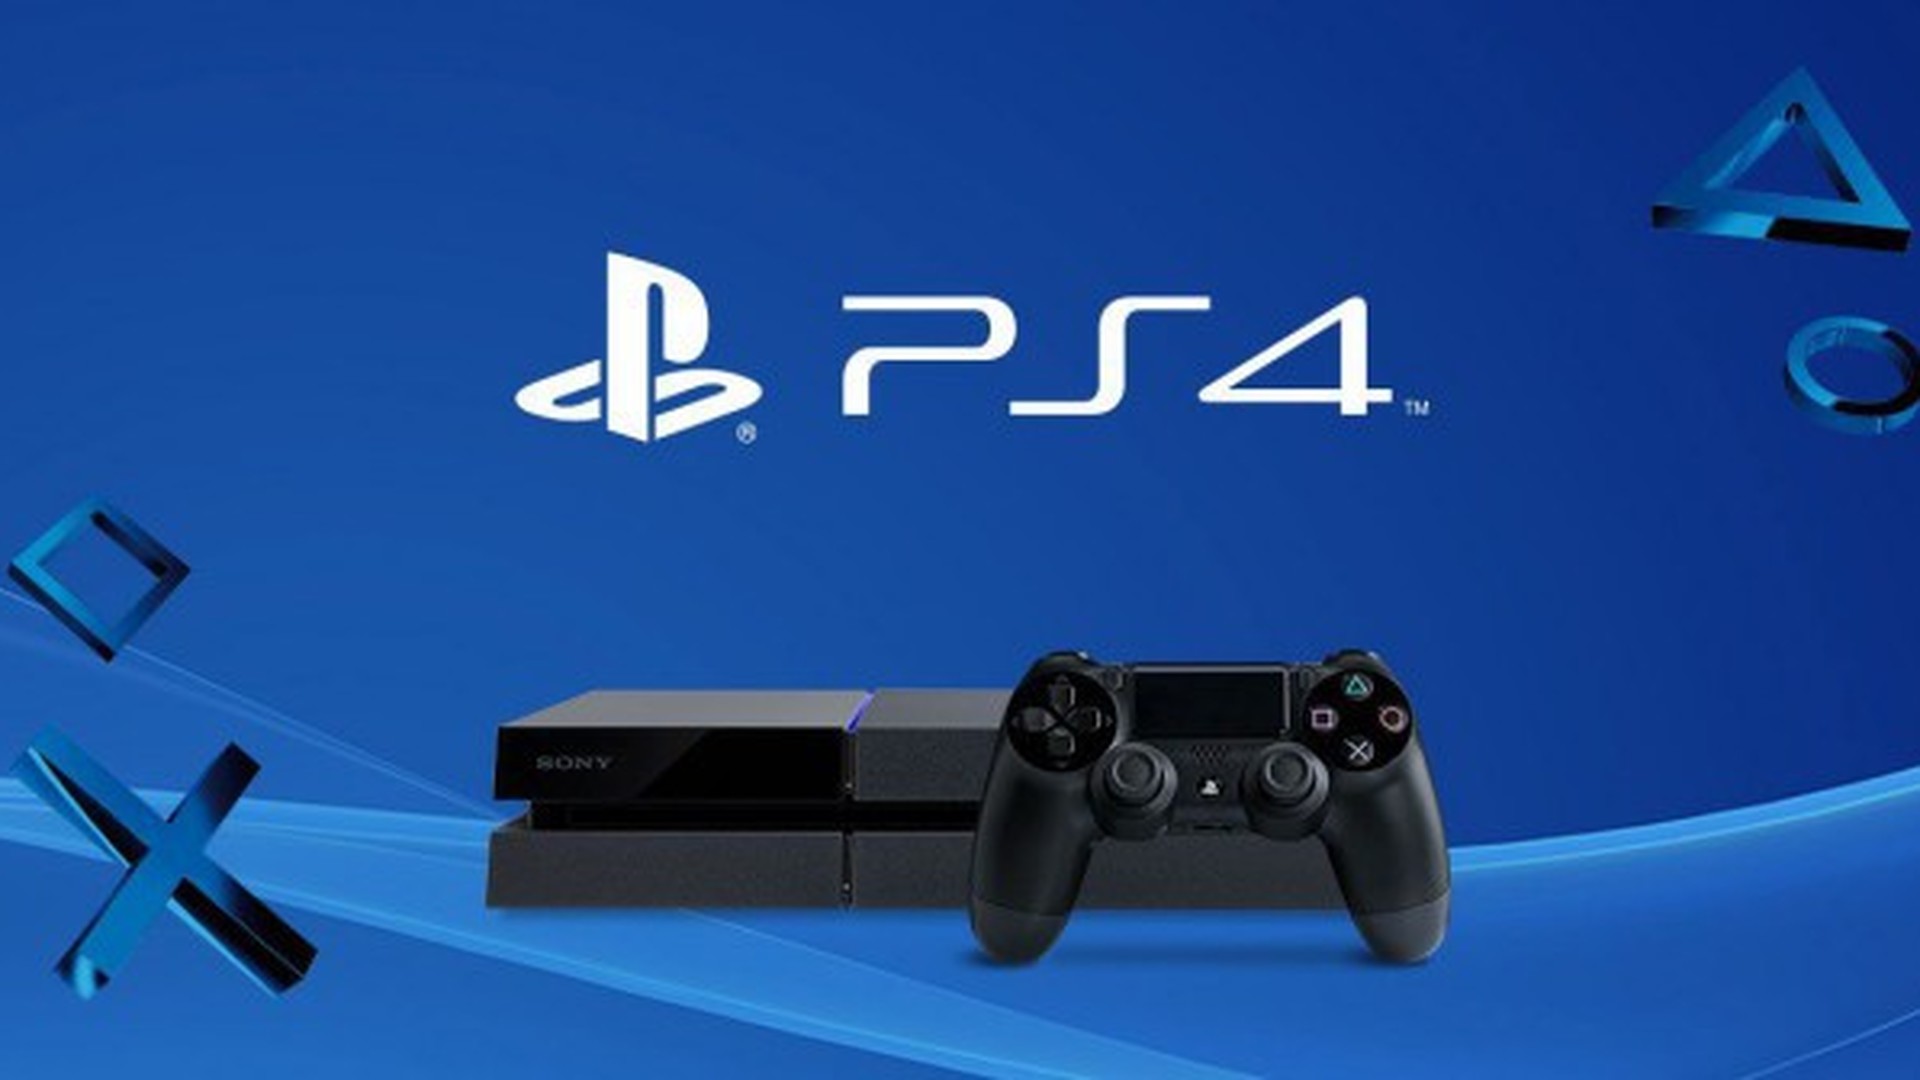 Playstation youtube. Сони ПС 5. Сони ПС 4. Sony PLAYSTATION 4 игры. Sony Front ps4.